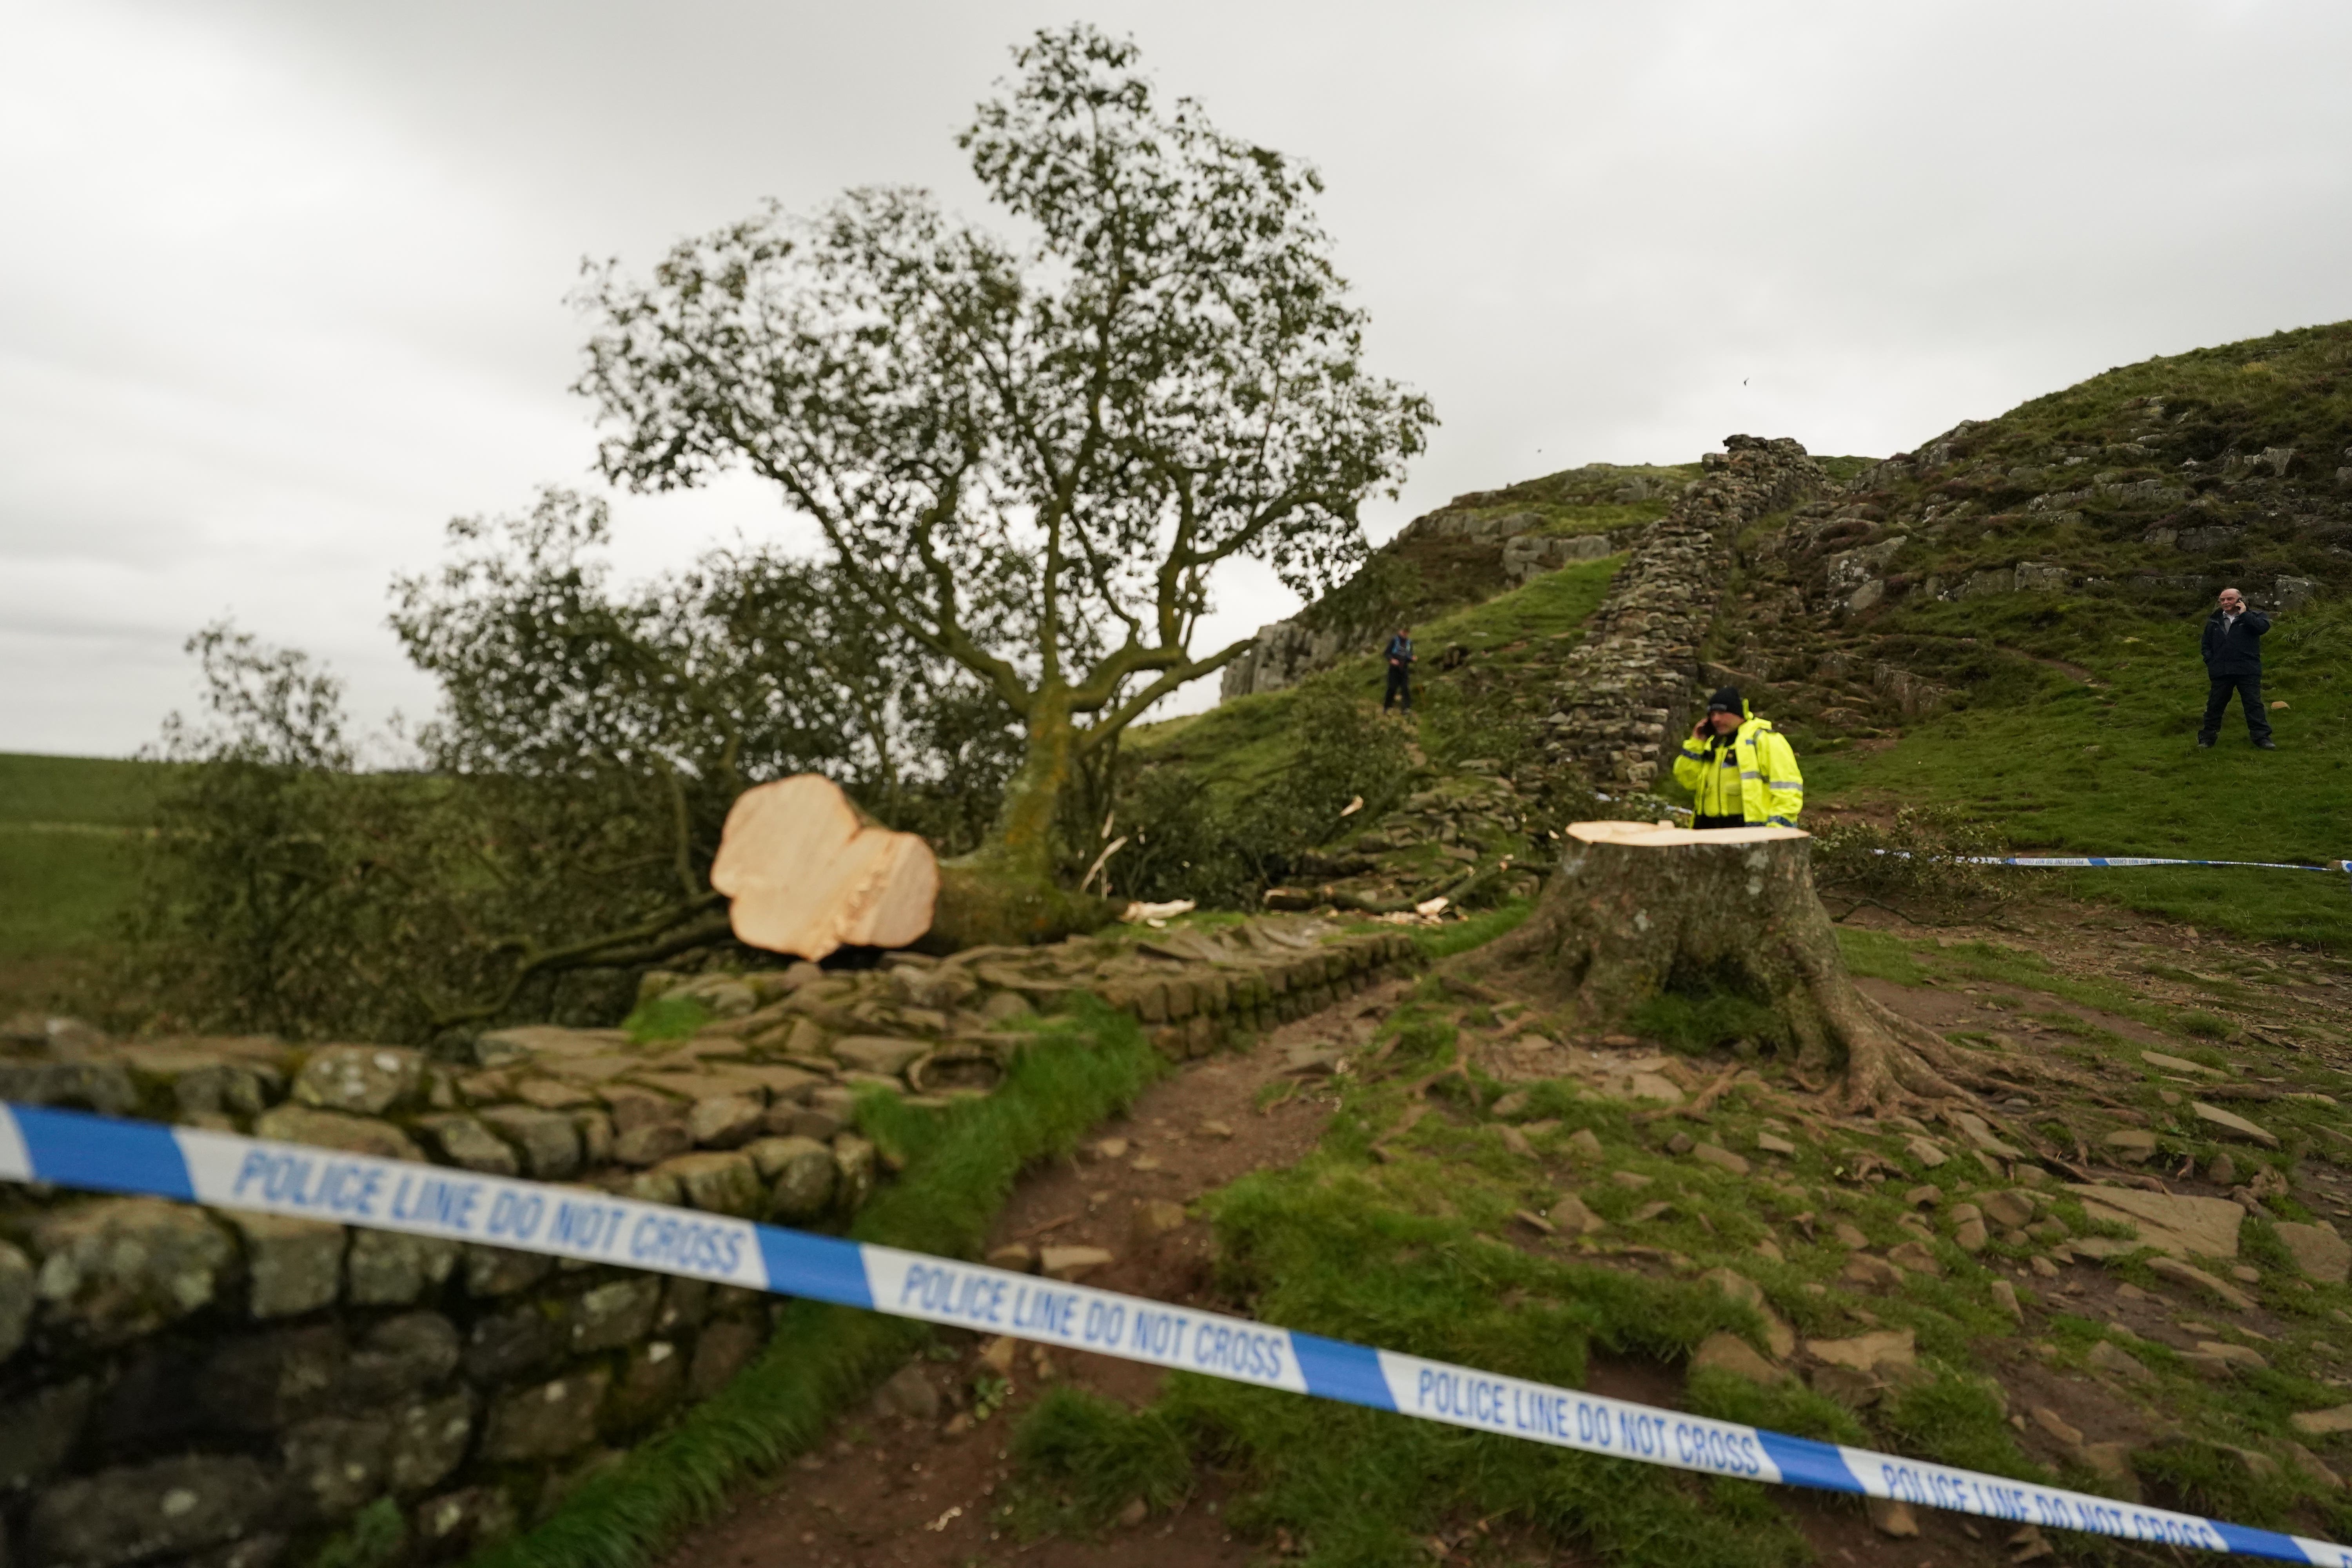 Police investigations are continuing into how the famous tree at Sycamore Gap came to be felled (Owen Humphreys/PA)